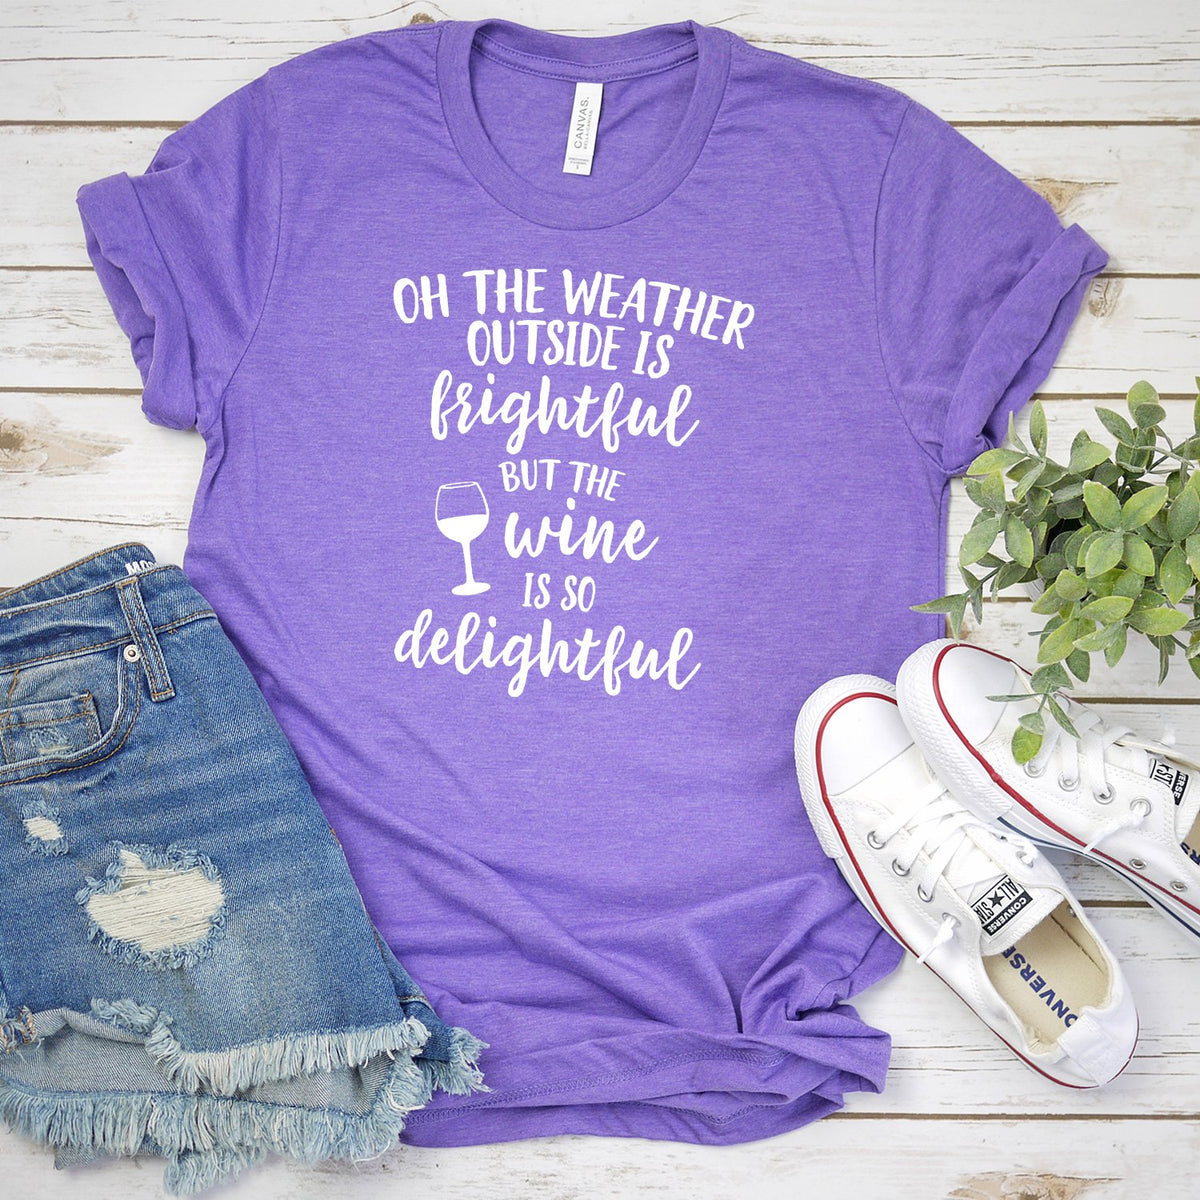 Oh The Weather Outside is Frightful But The Wine is So Delightful - Short Sleeve Tee Shirt